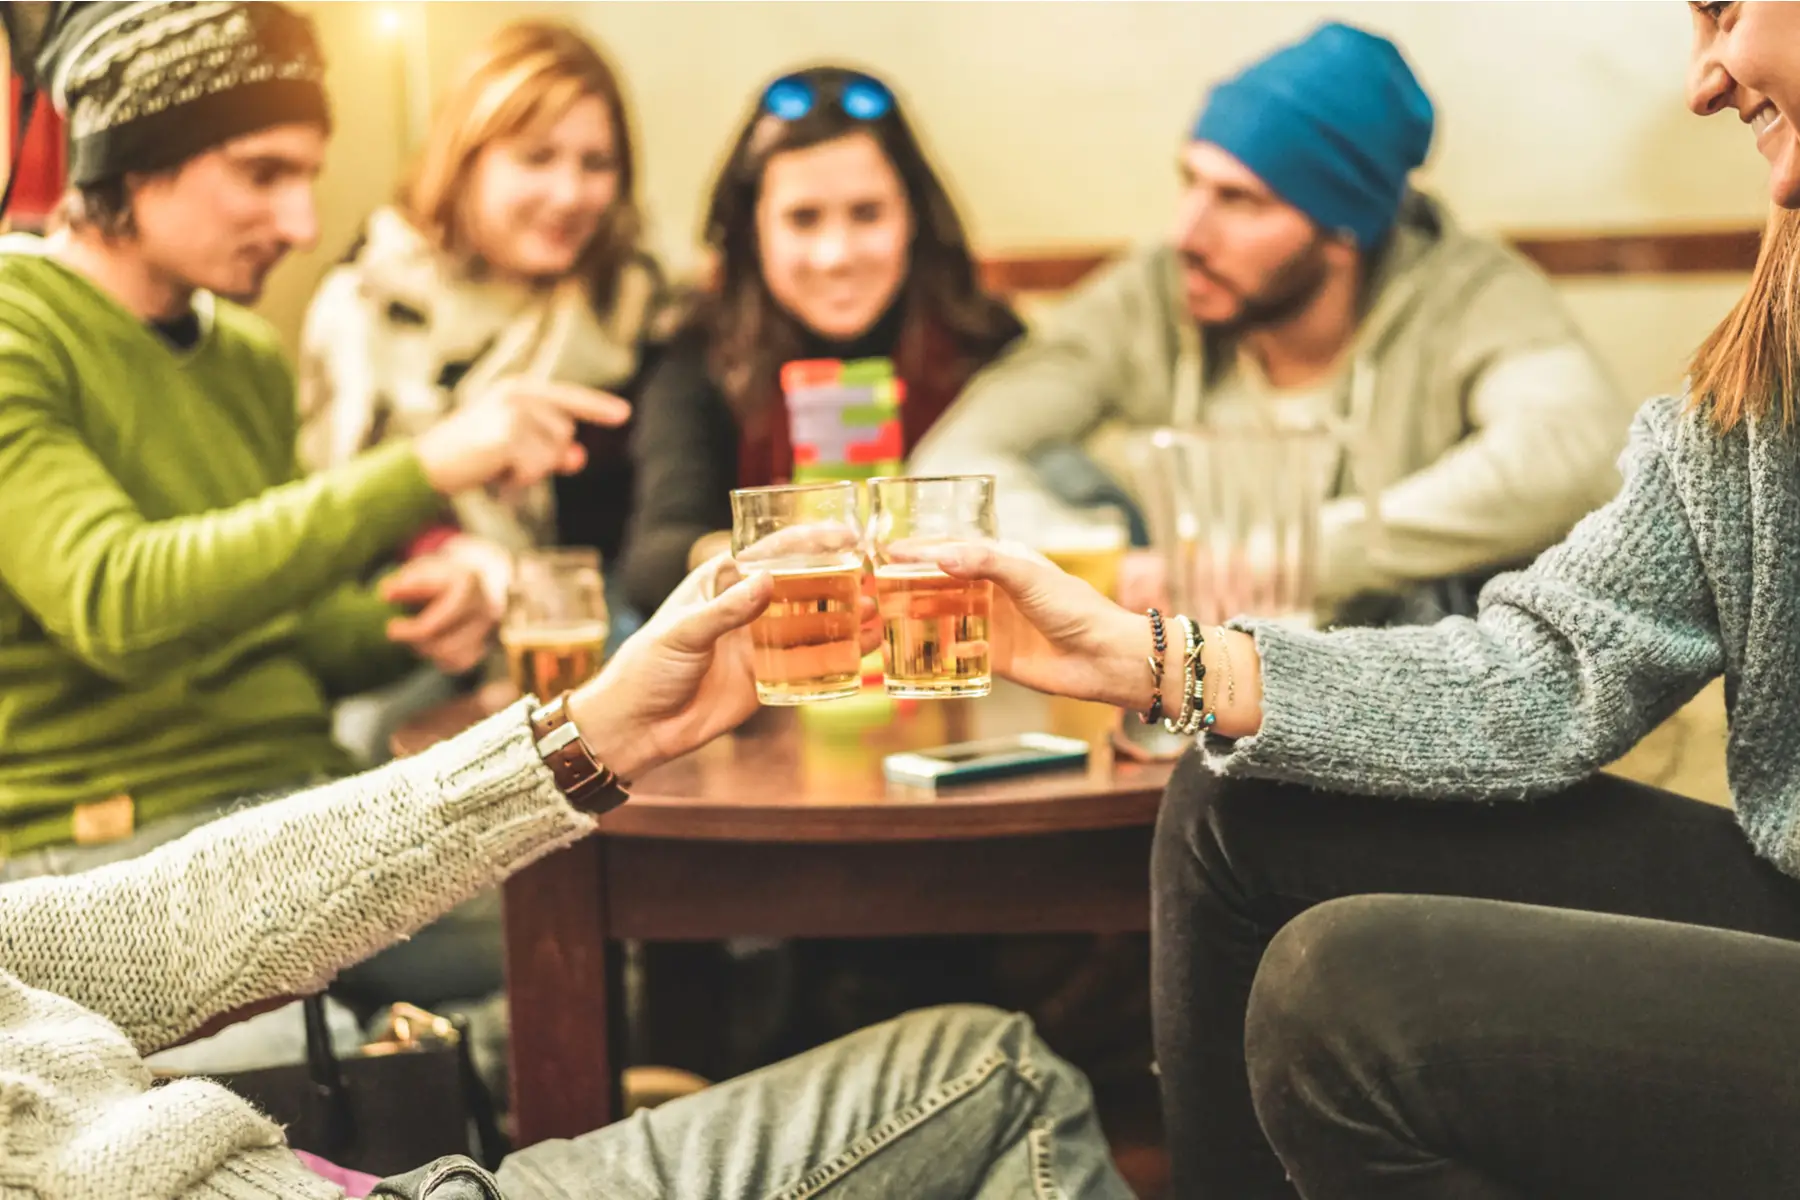 Friends drinking beer together after skiing